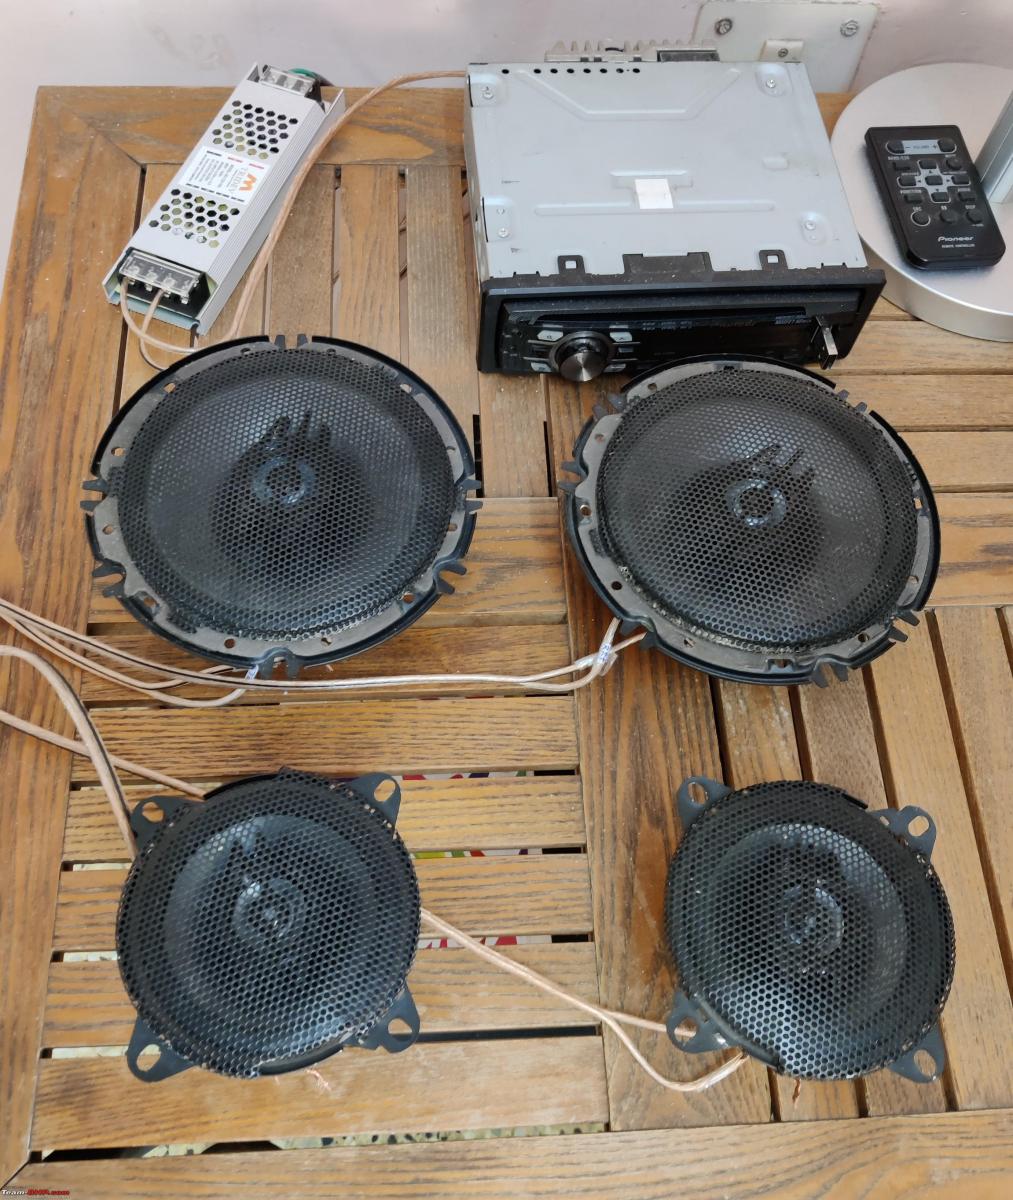 DIY: Convert car audio system into wooden home audio system | Team-BHP